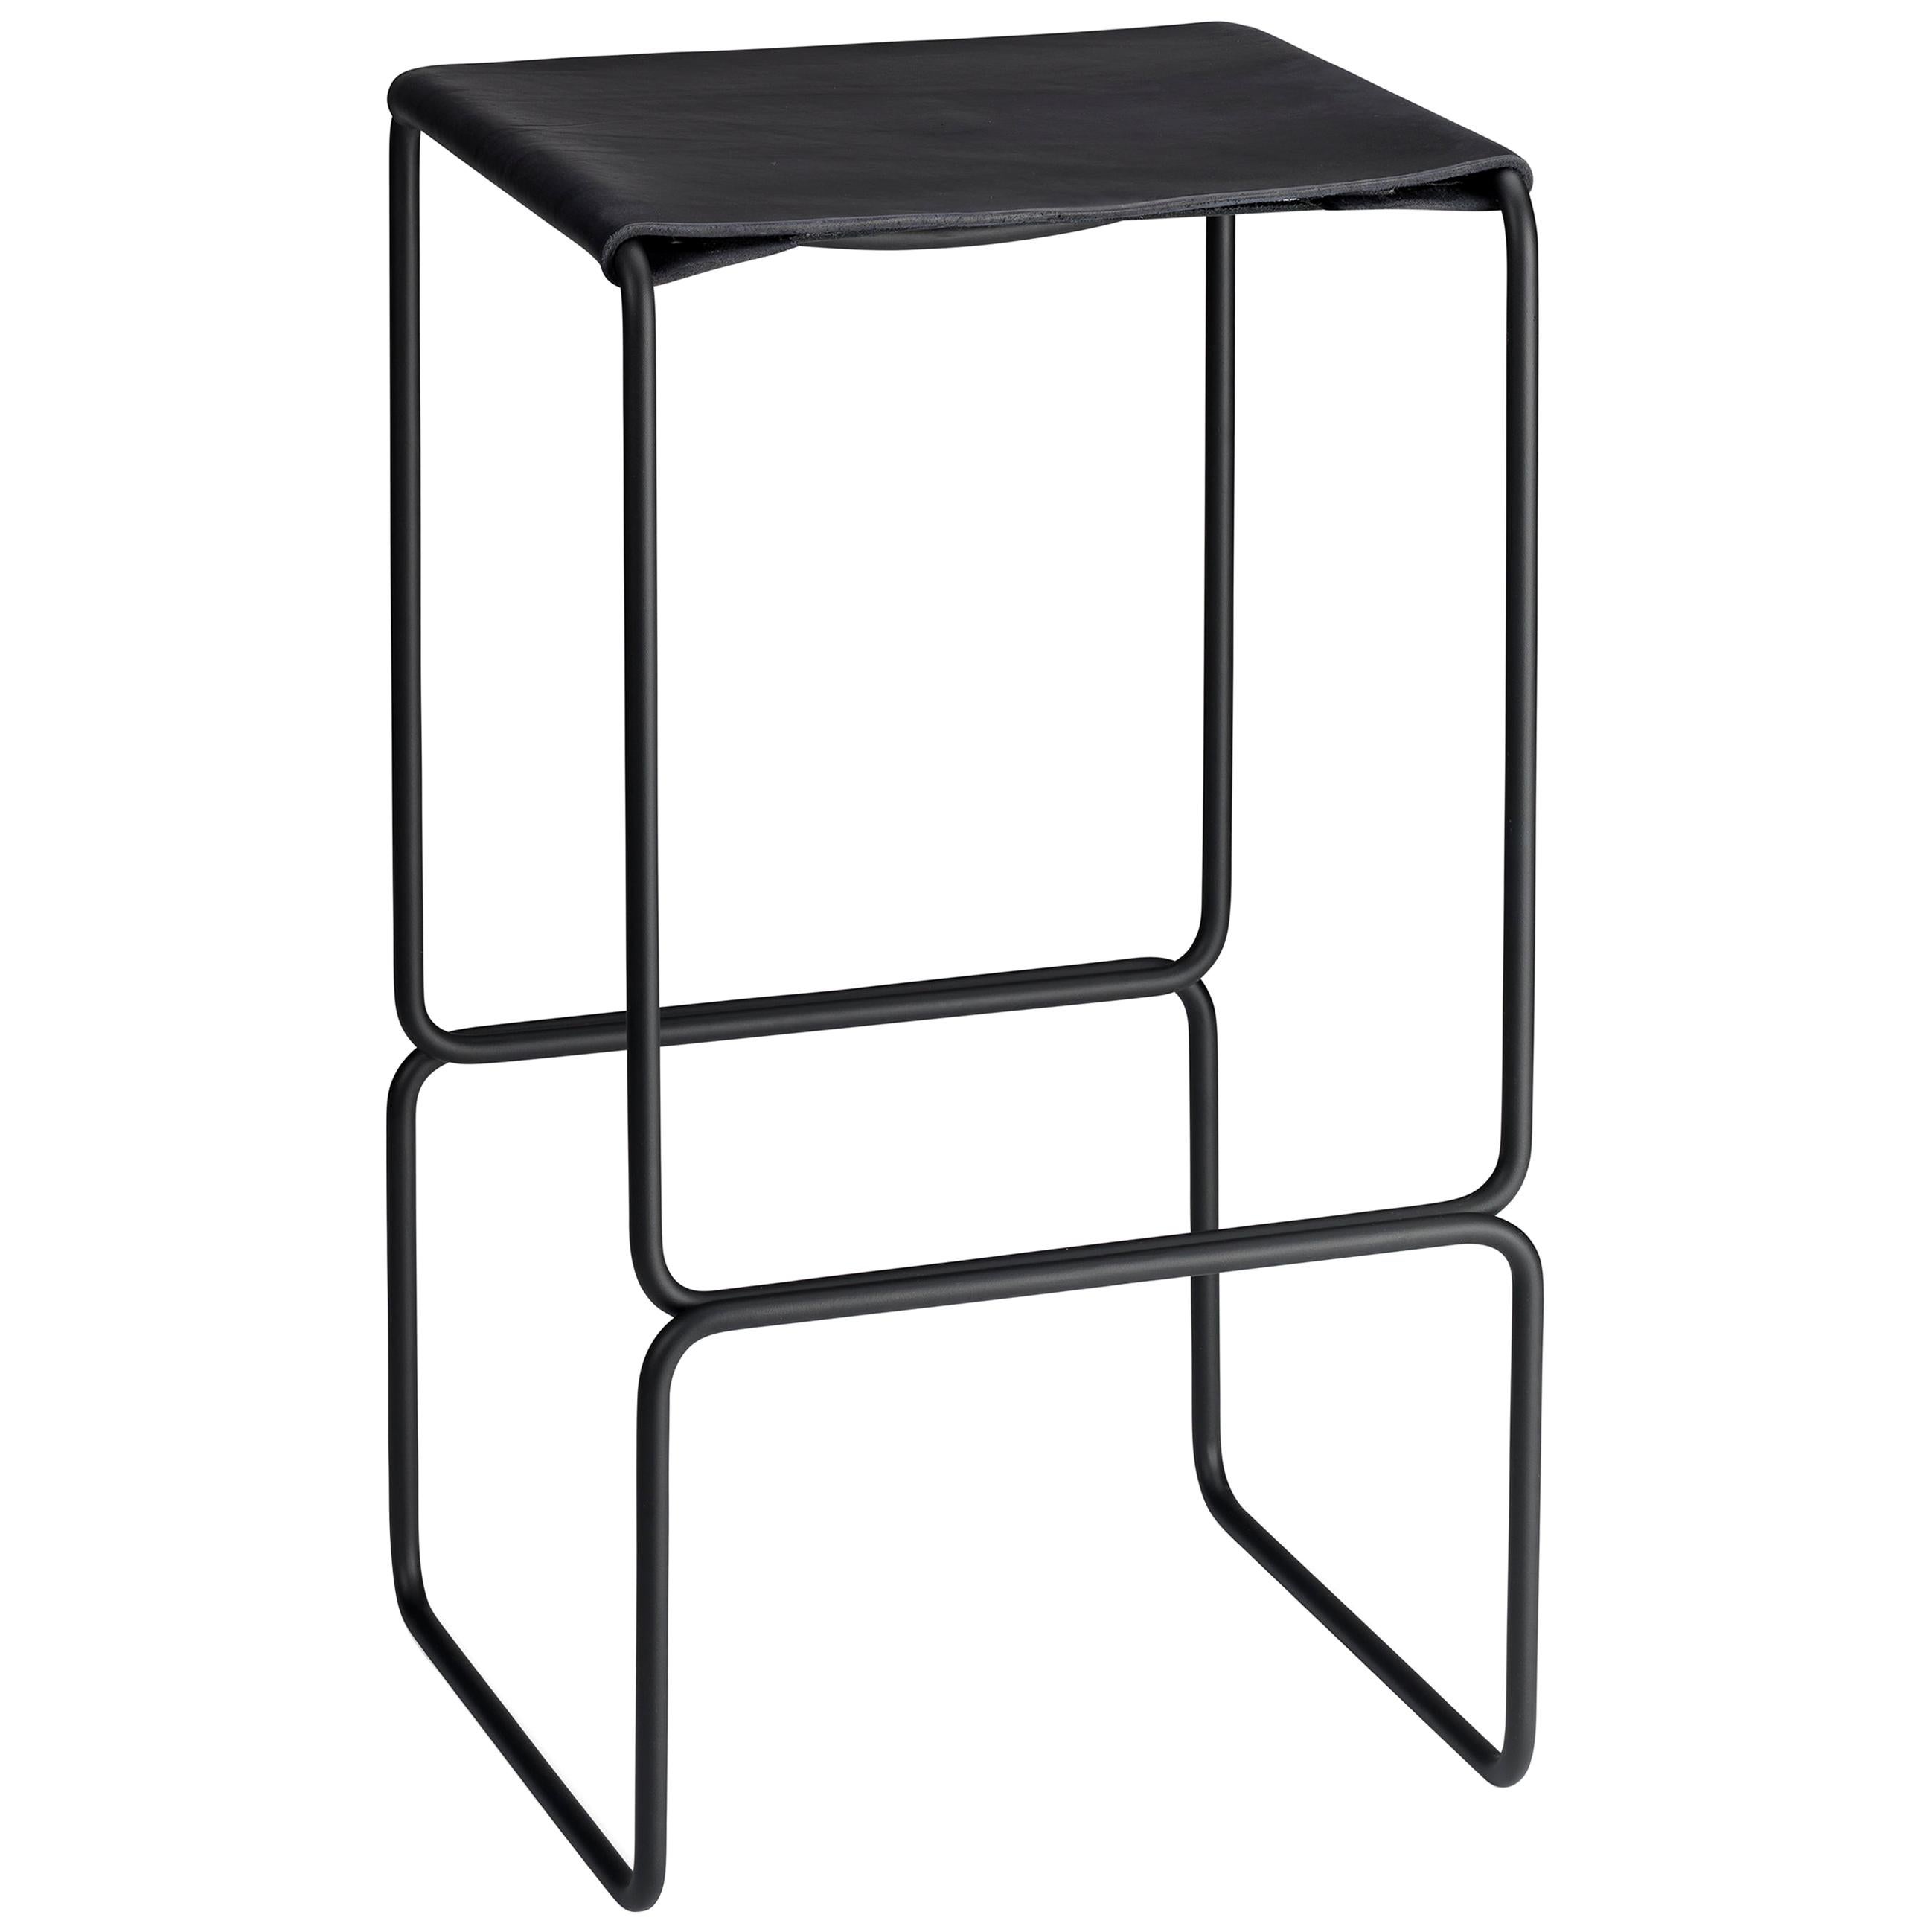 Black Steel Powder Coated Leather Counter Seat For Sale